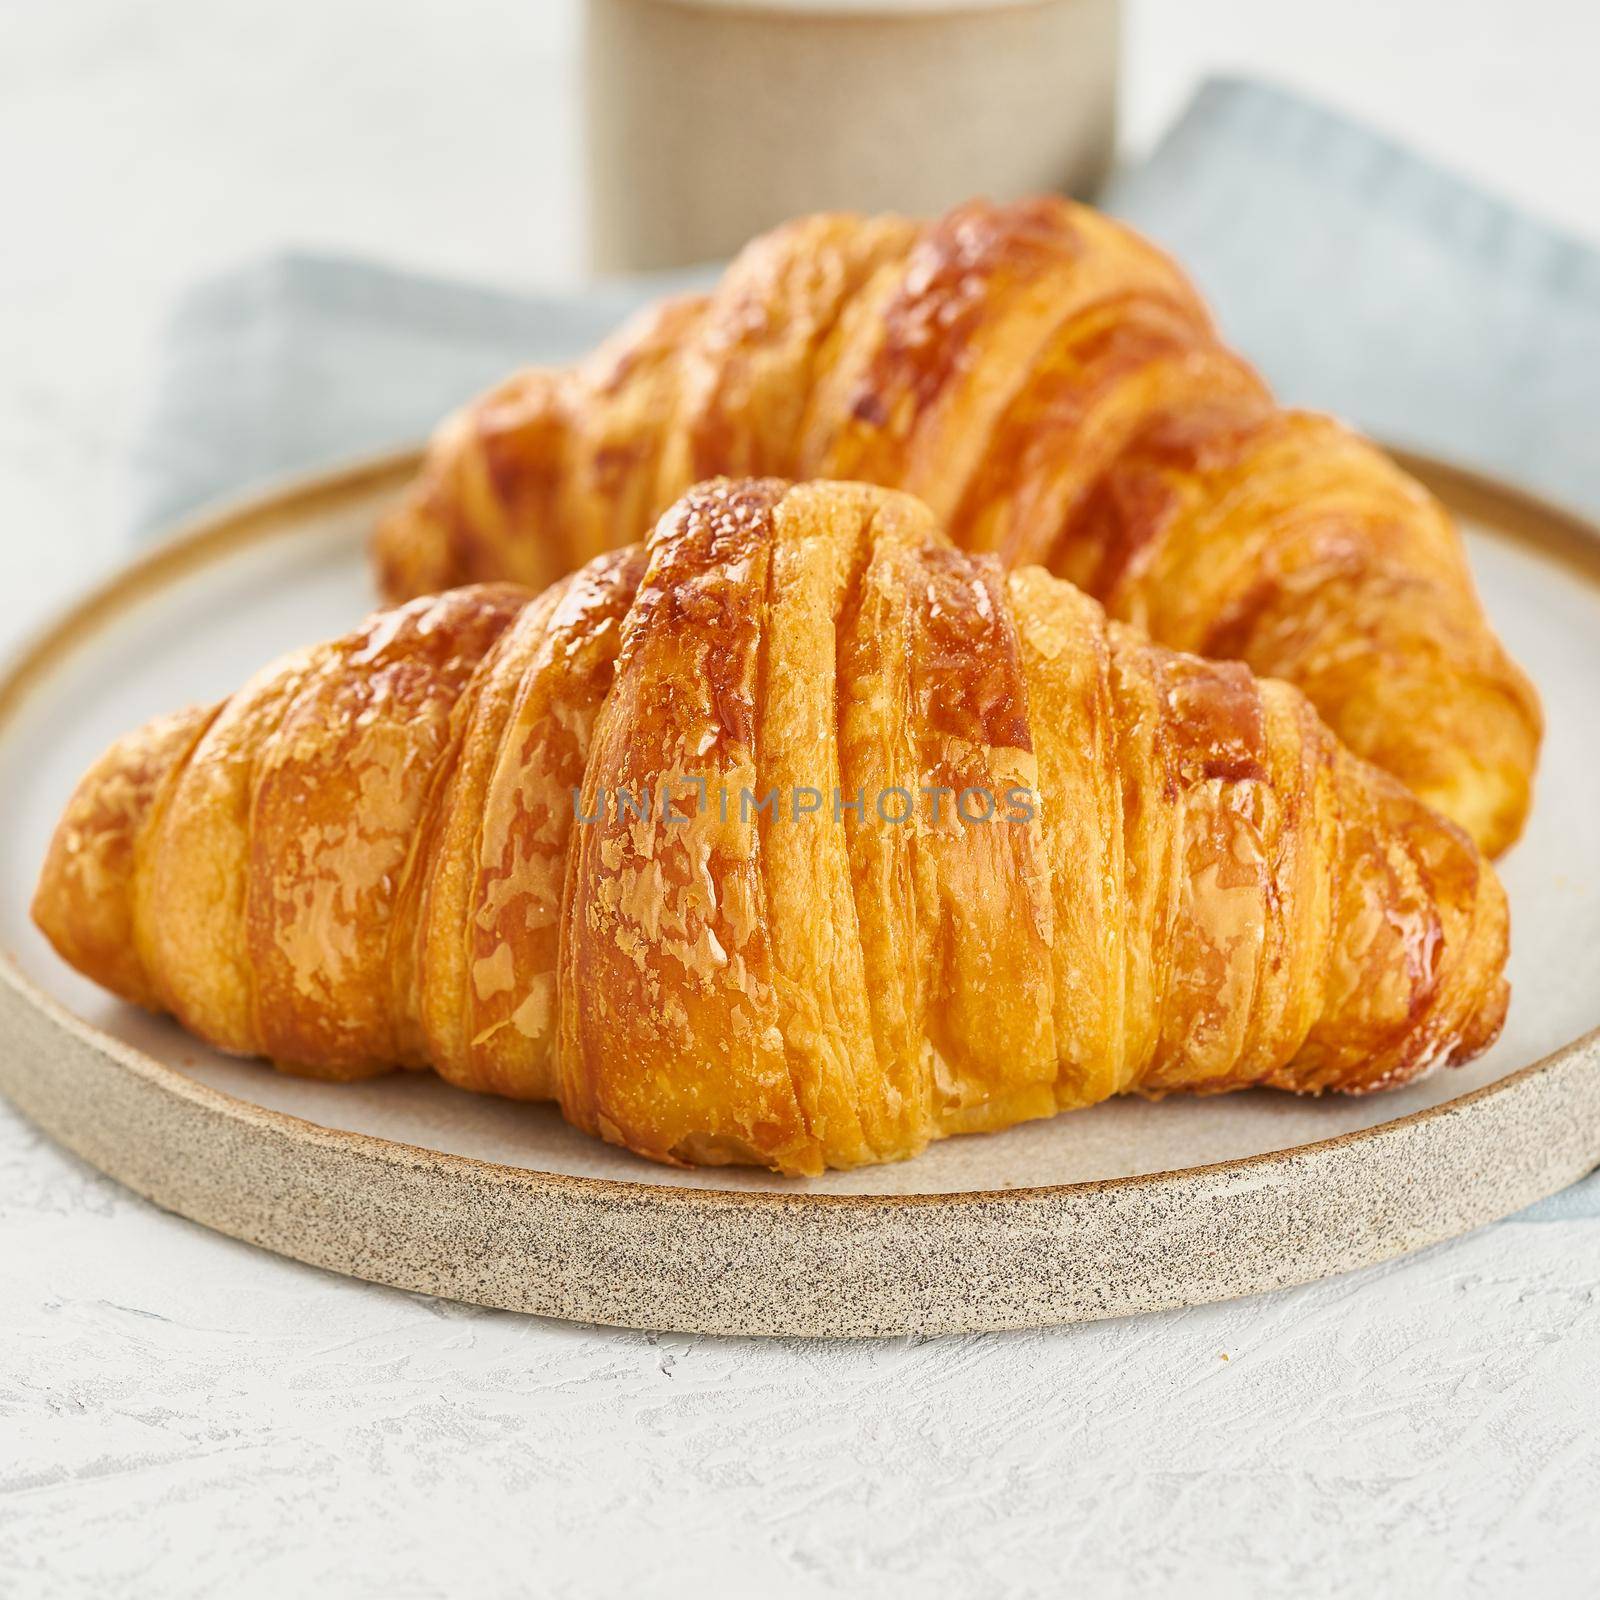 Two delicious croissants on a plate and a hot drink in a mug. Morning French breakfast with fresh pastries. Light gray background, close up, macro